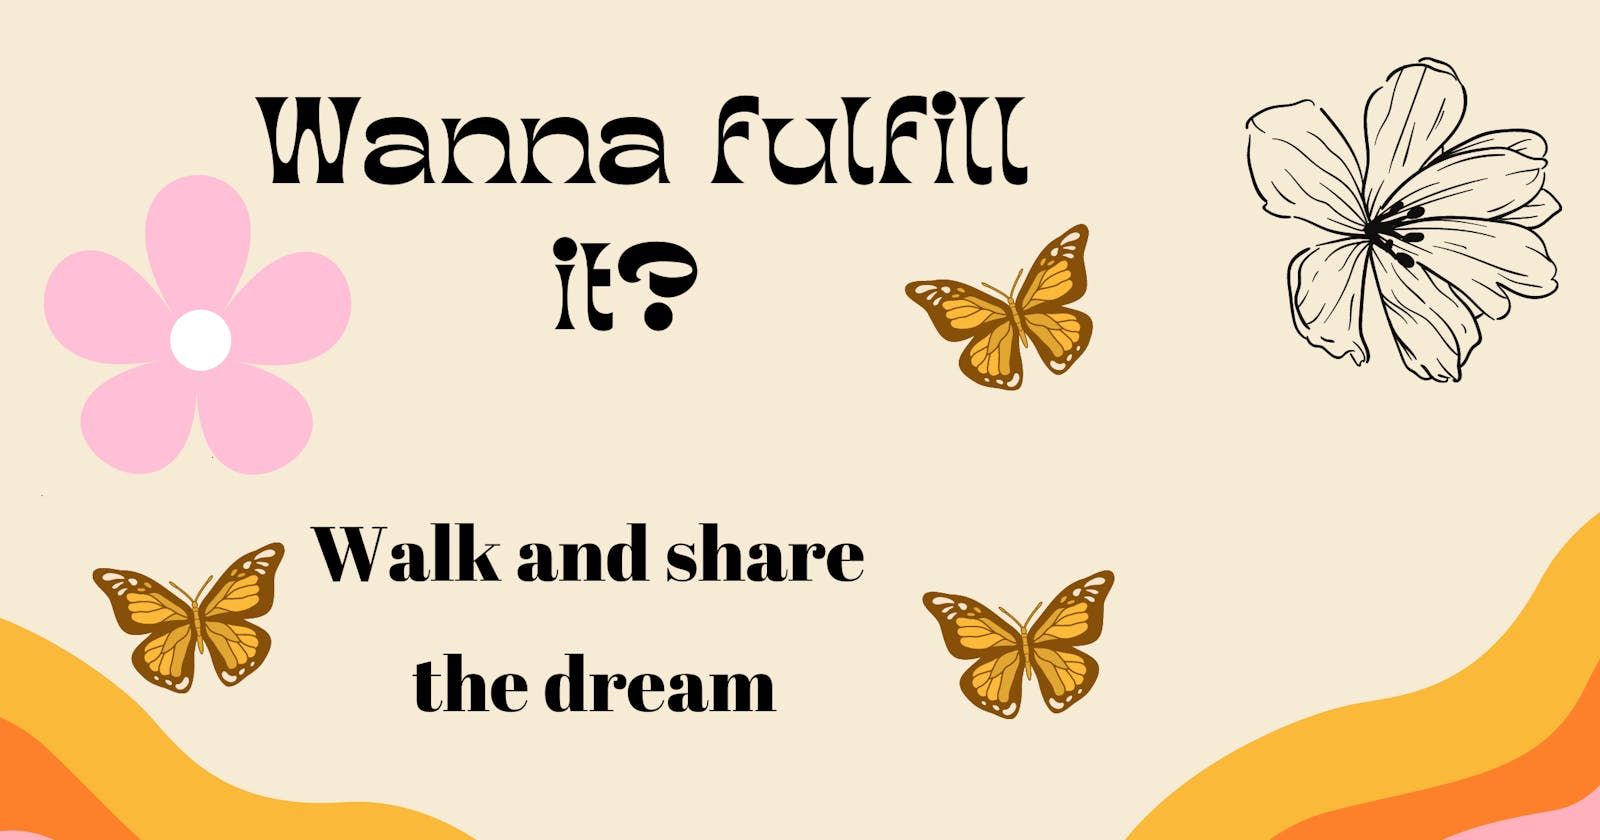 Wanna fulfill it? Walk and share the dream.
# 4Articles4Weeks
#Week 1